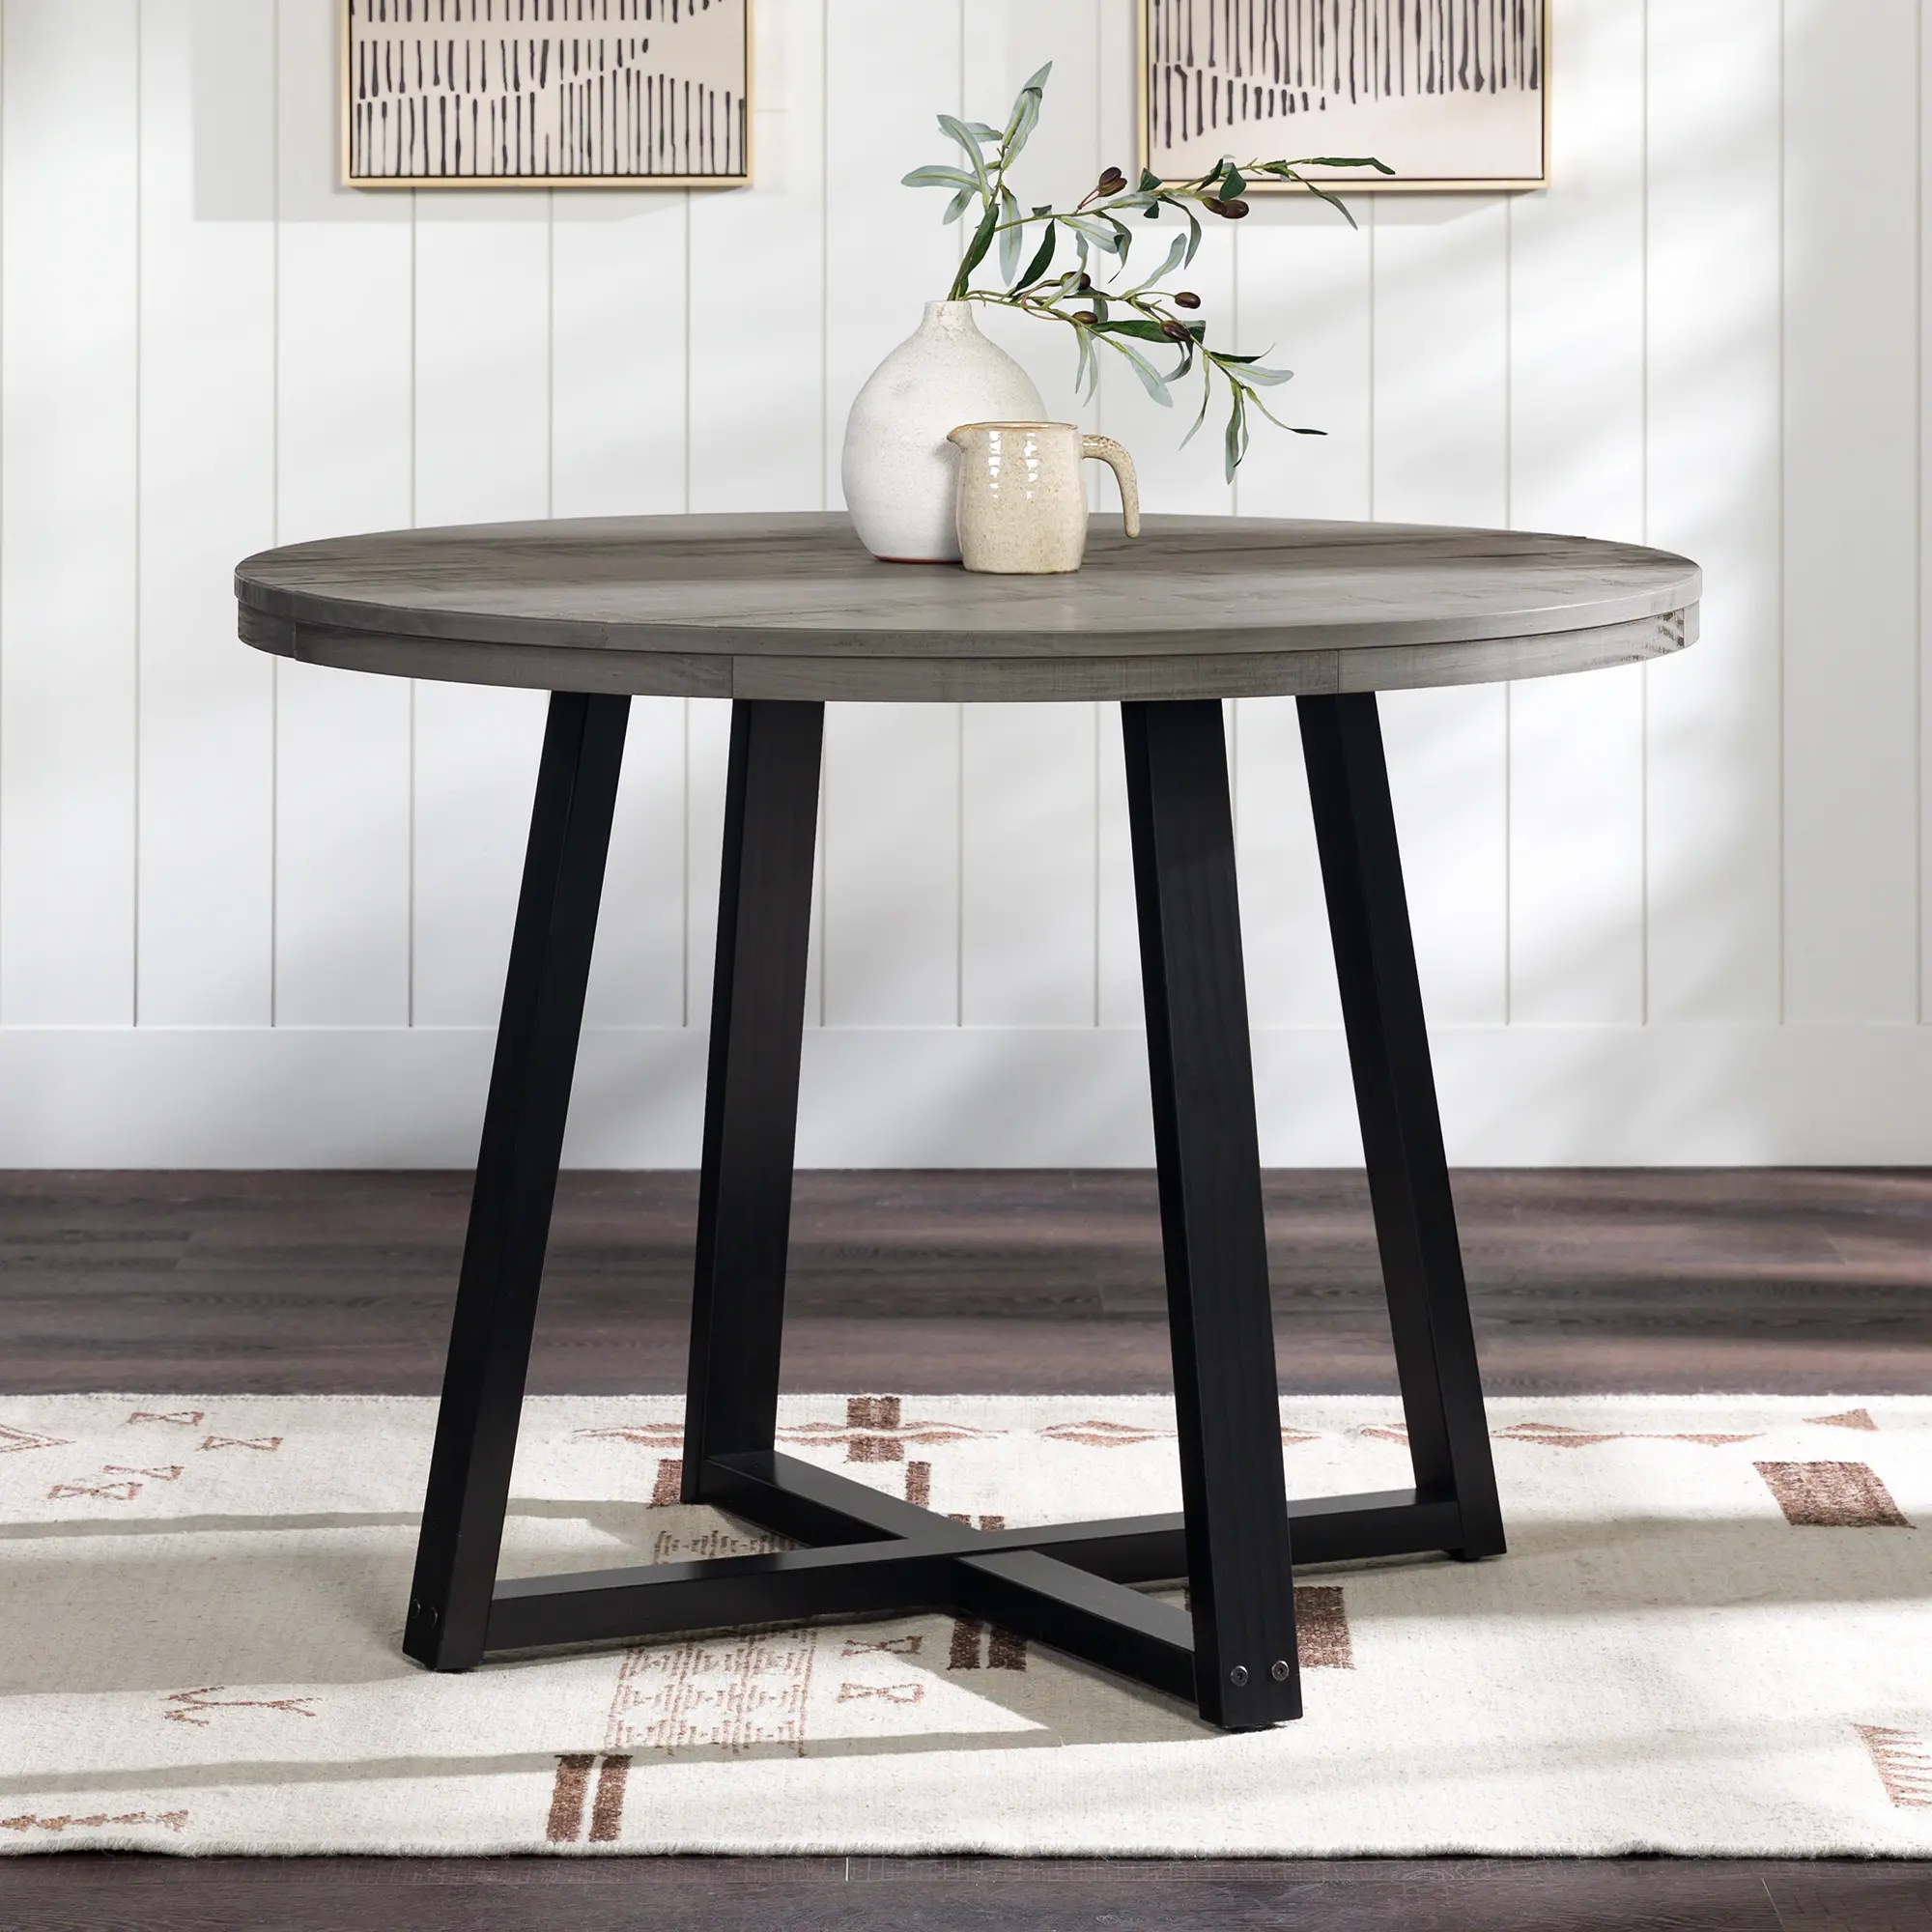 DNGD6EGY Durango 42 Distressed Gray Round Dining Table sku DNGD6EGY